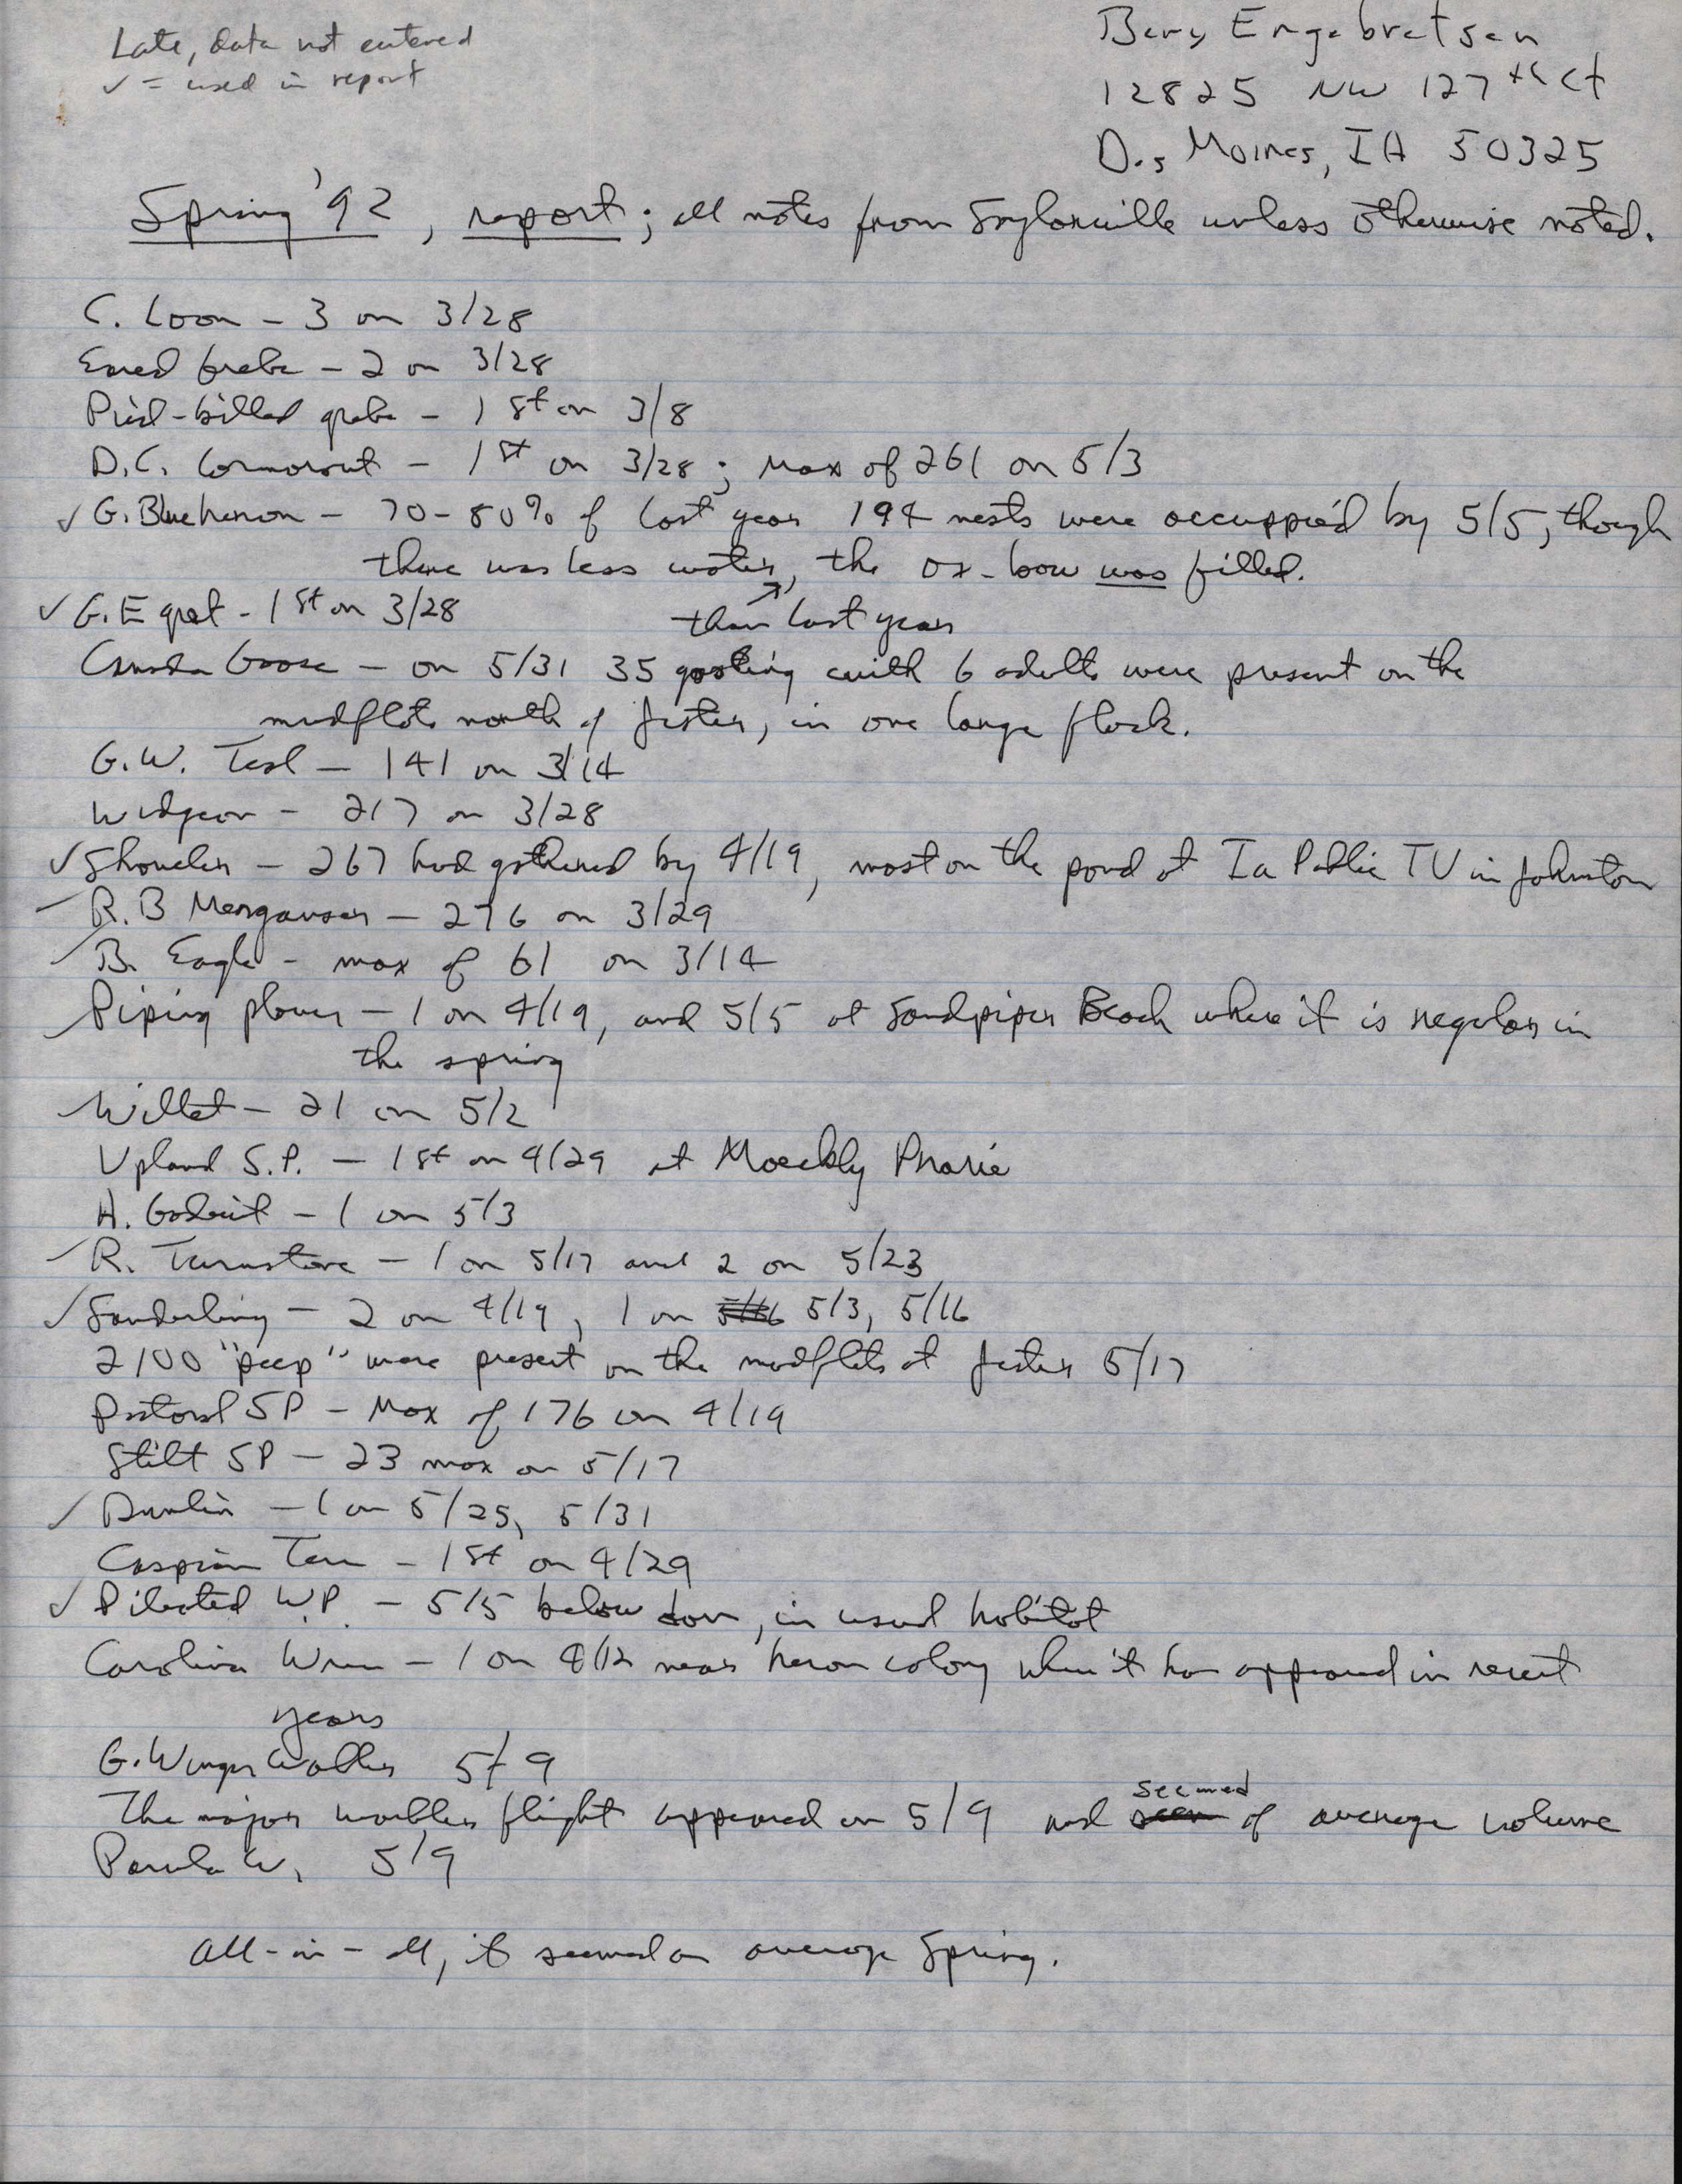 Field notes contributed by Bery Engebretsen, spring 1992